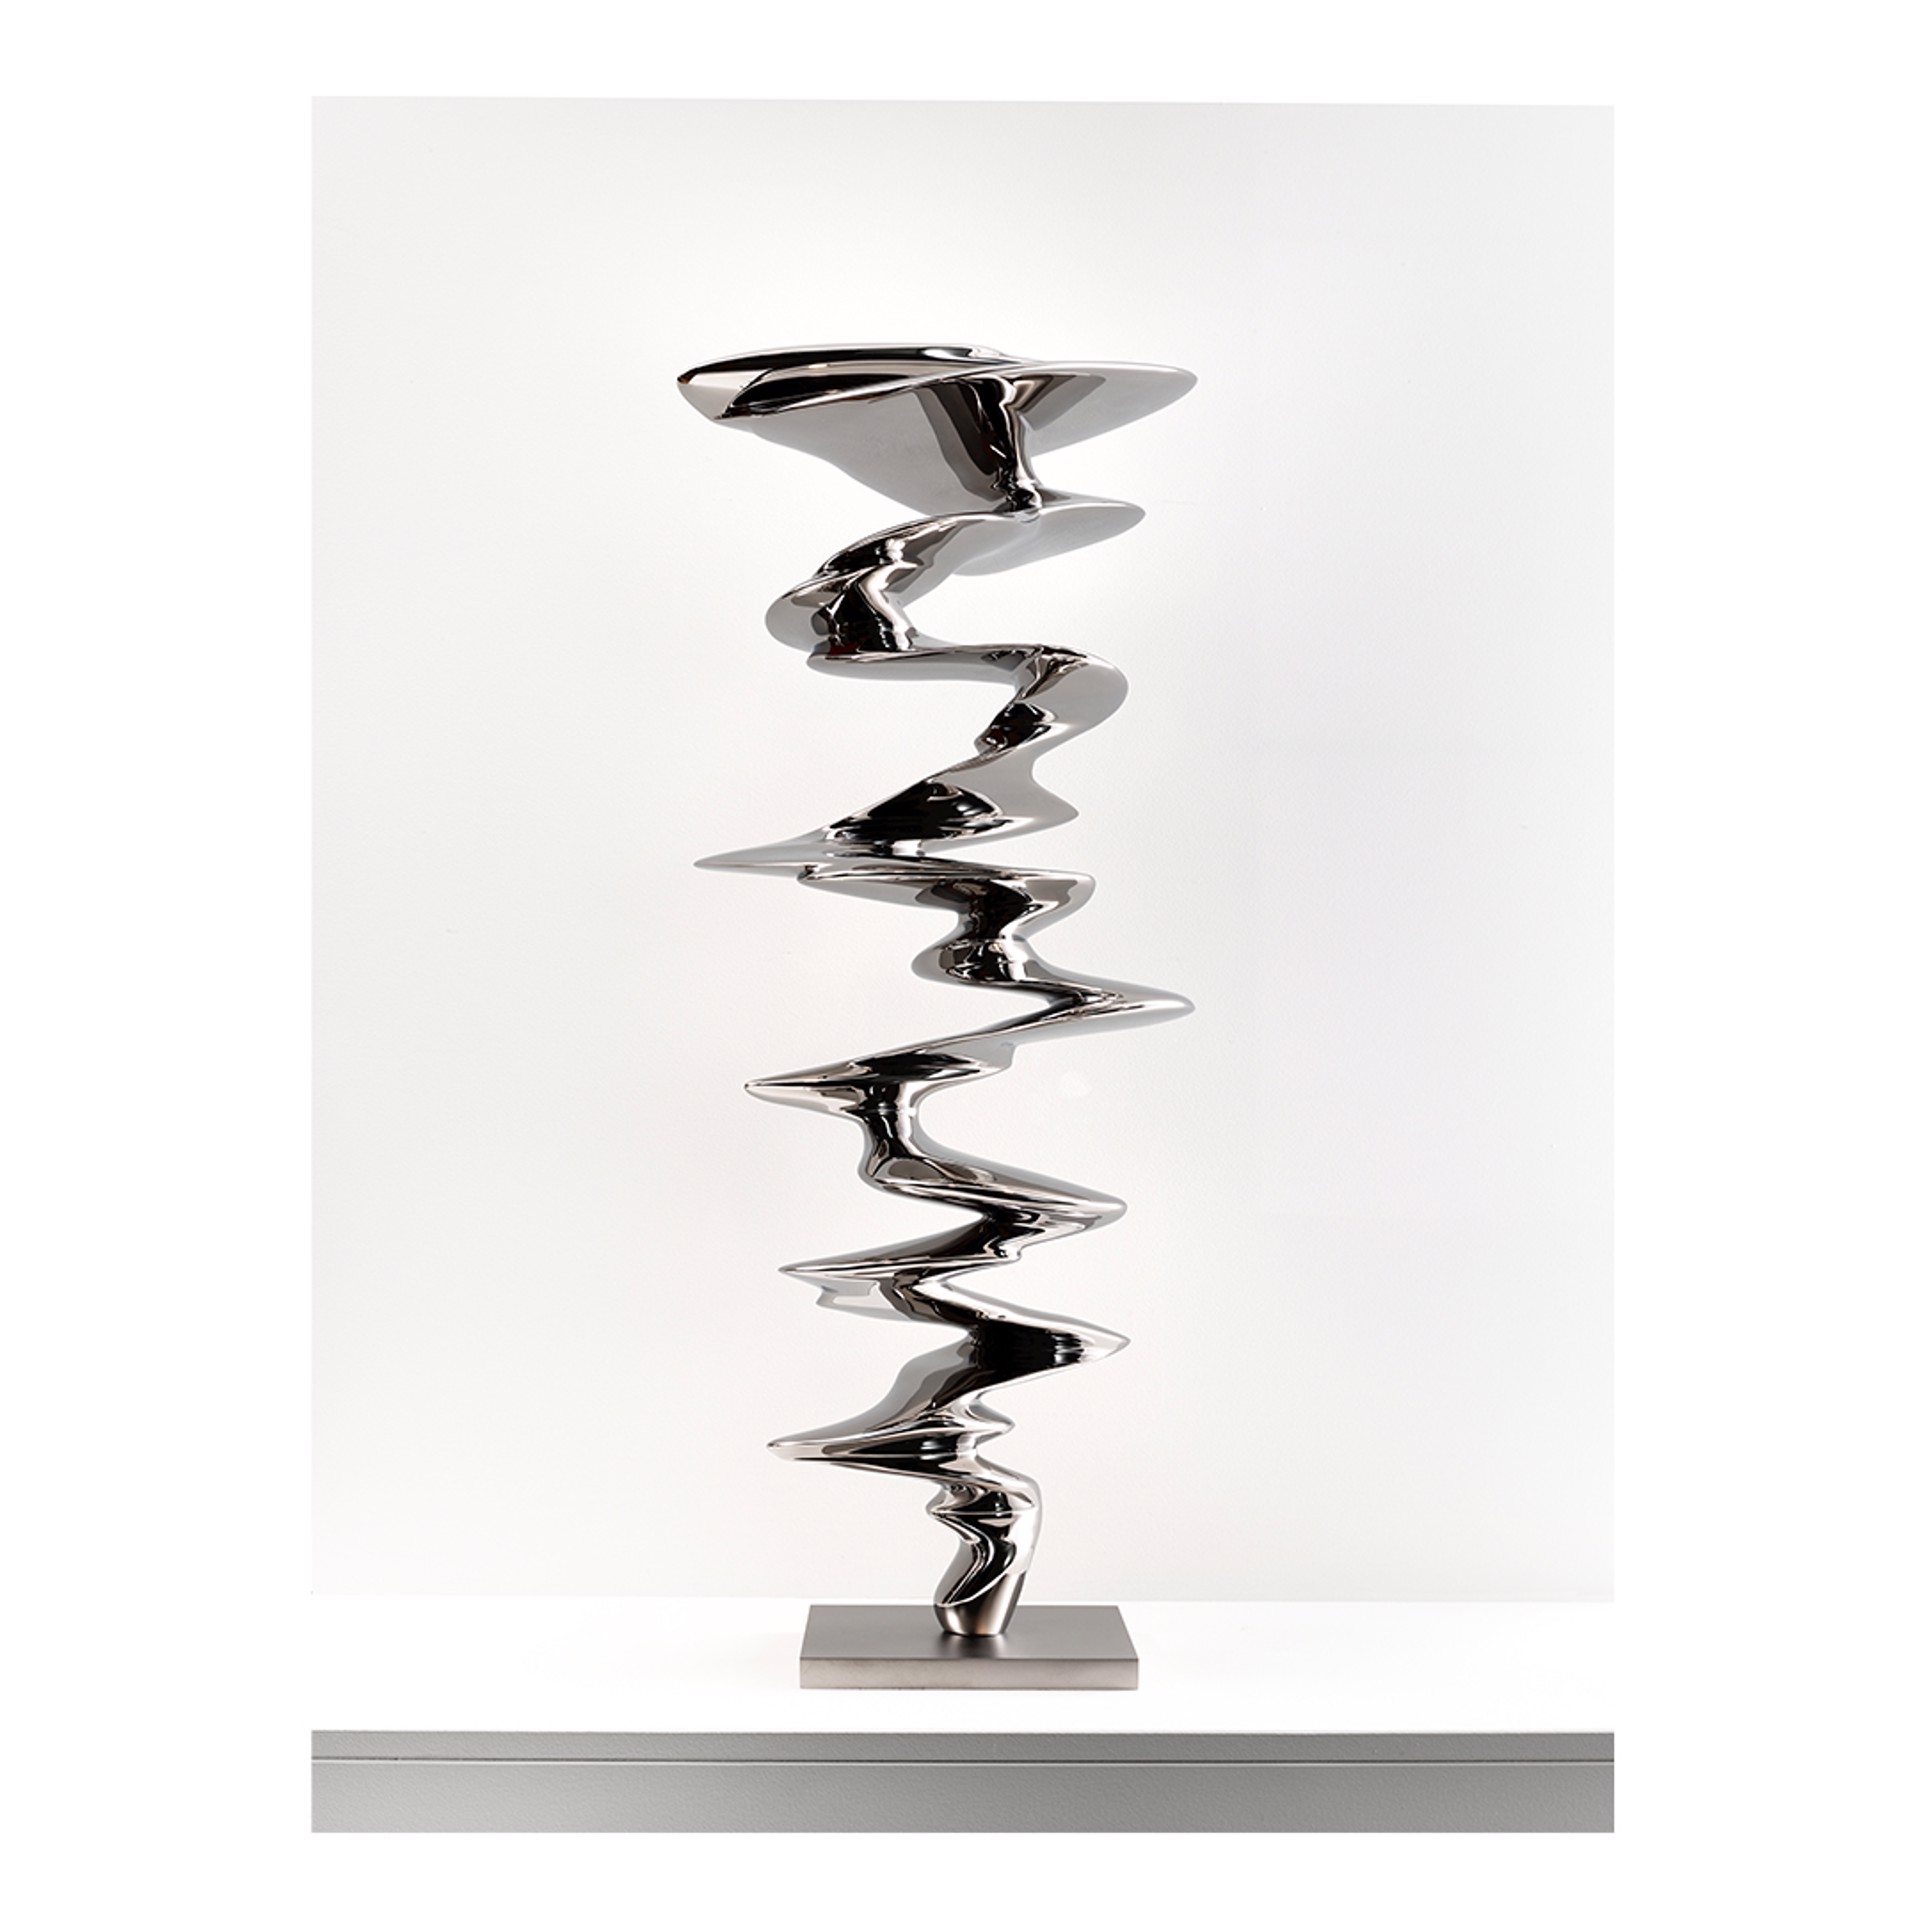 Stage by Tony Cragg